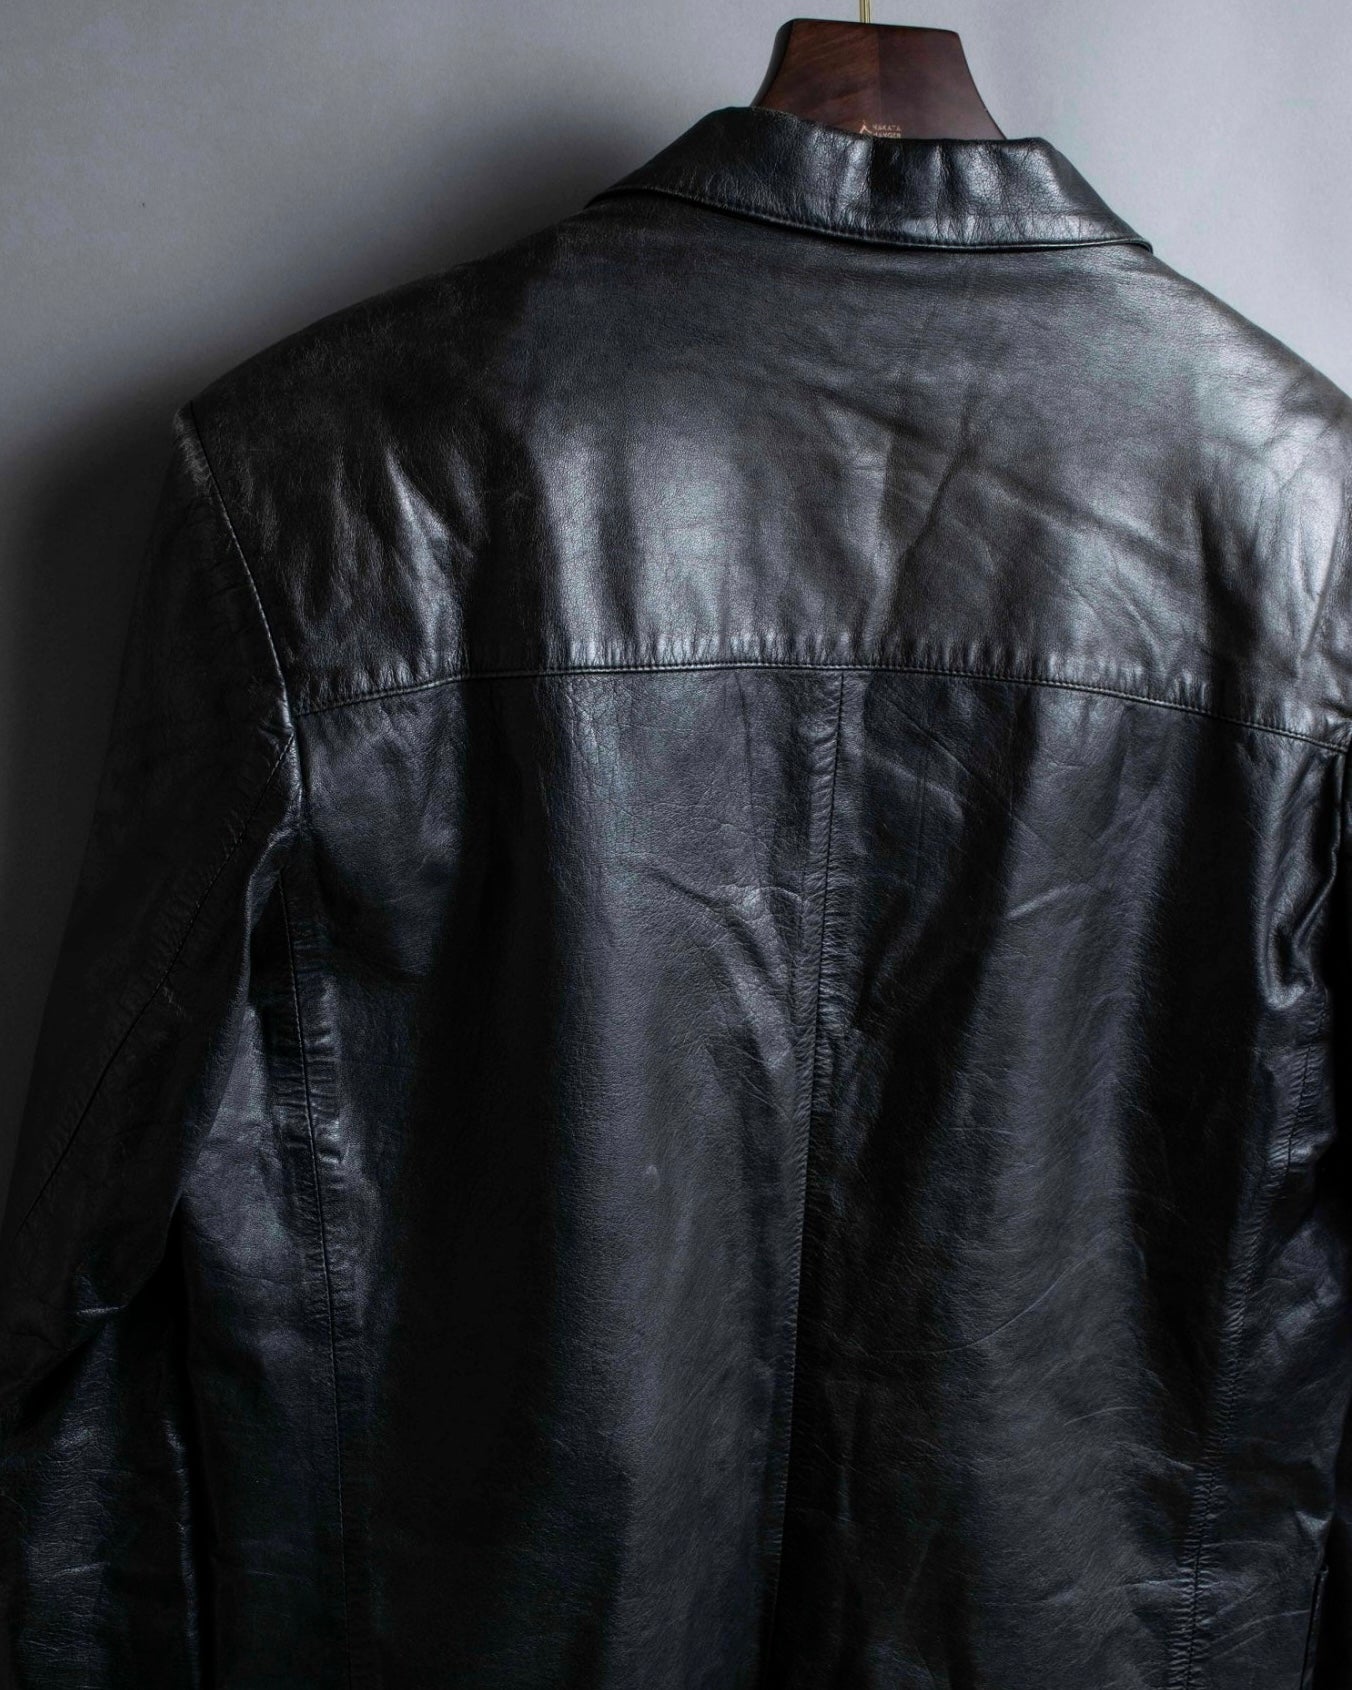 "Calvin Klein" Faded leather tailored jacket